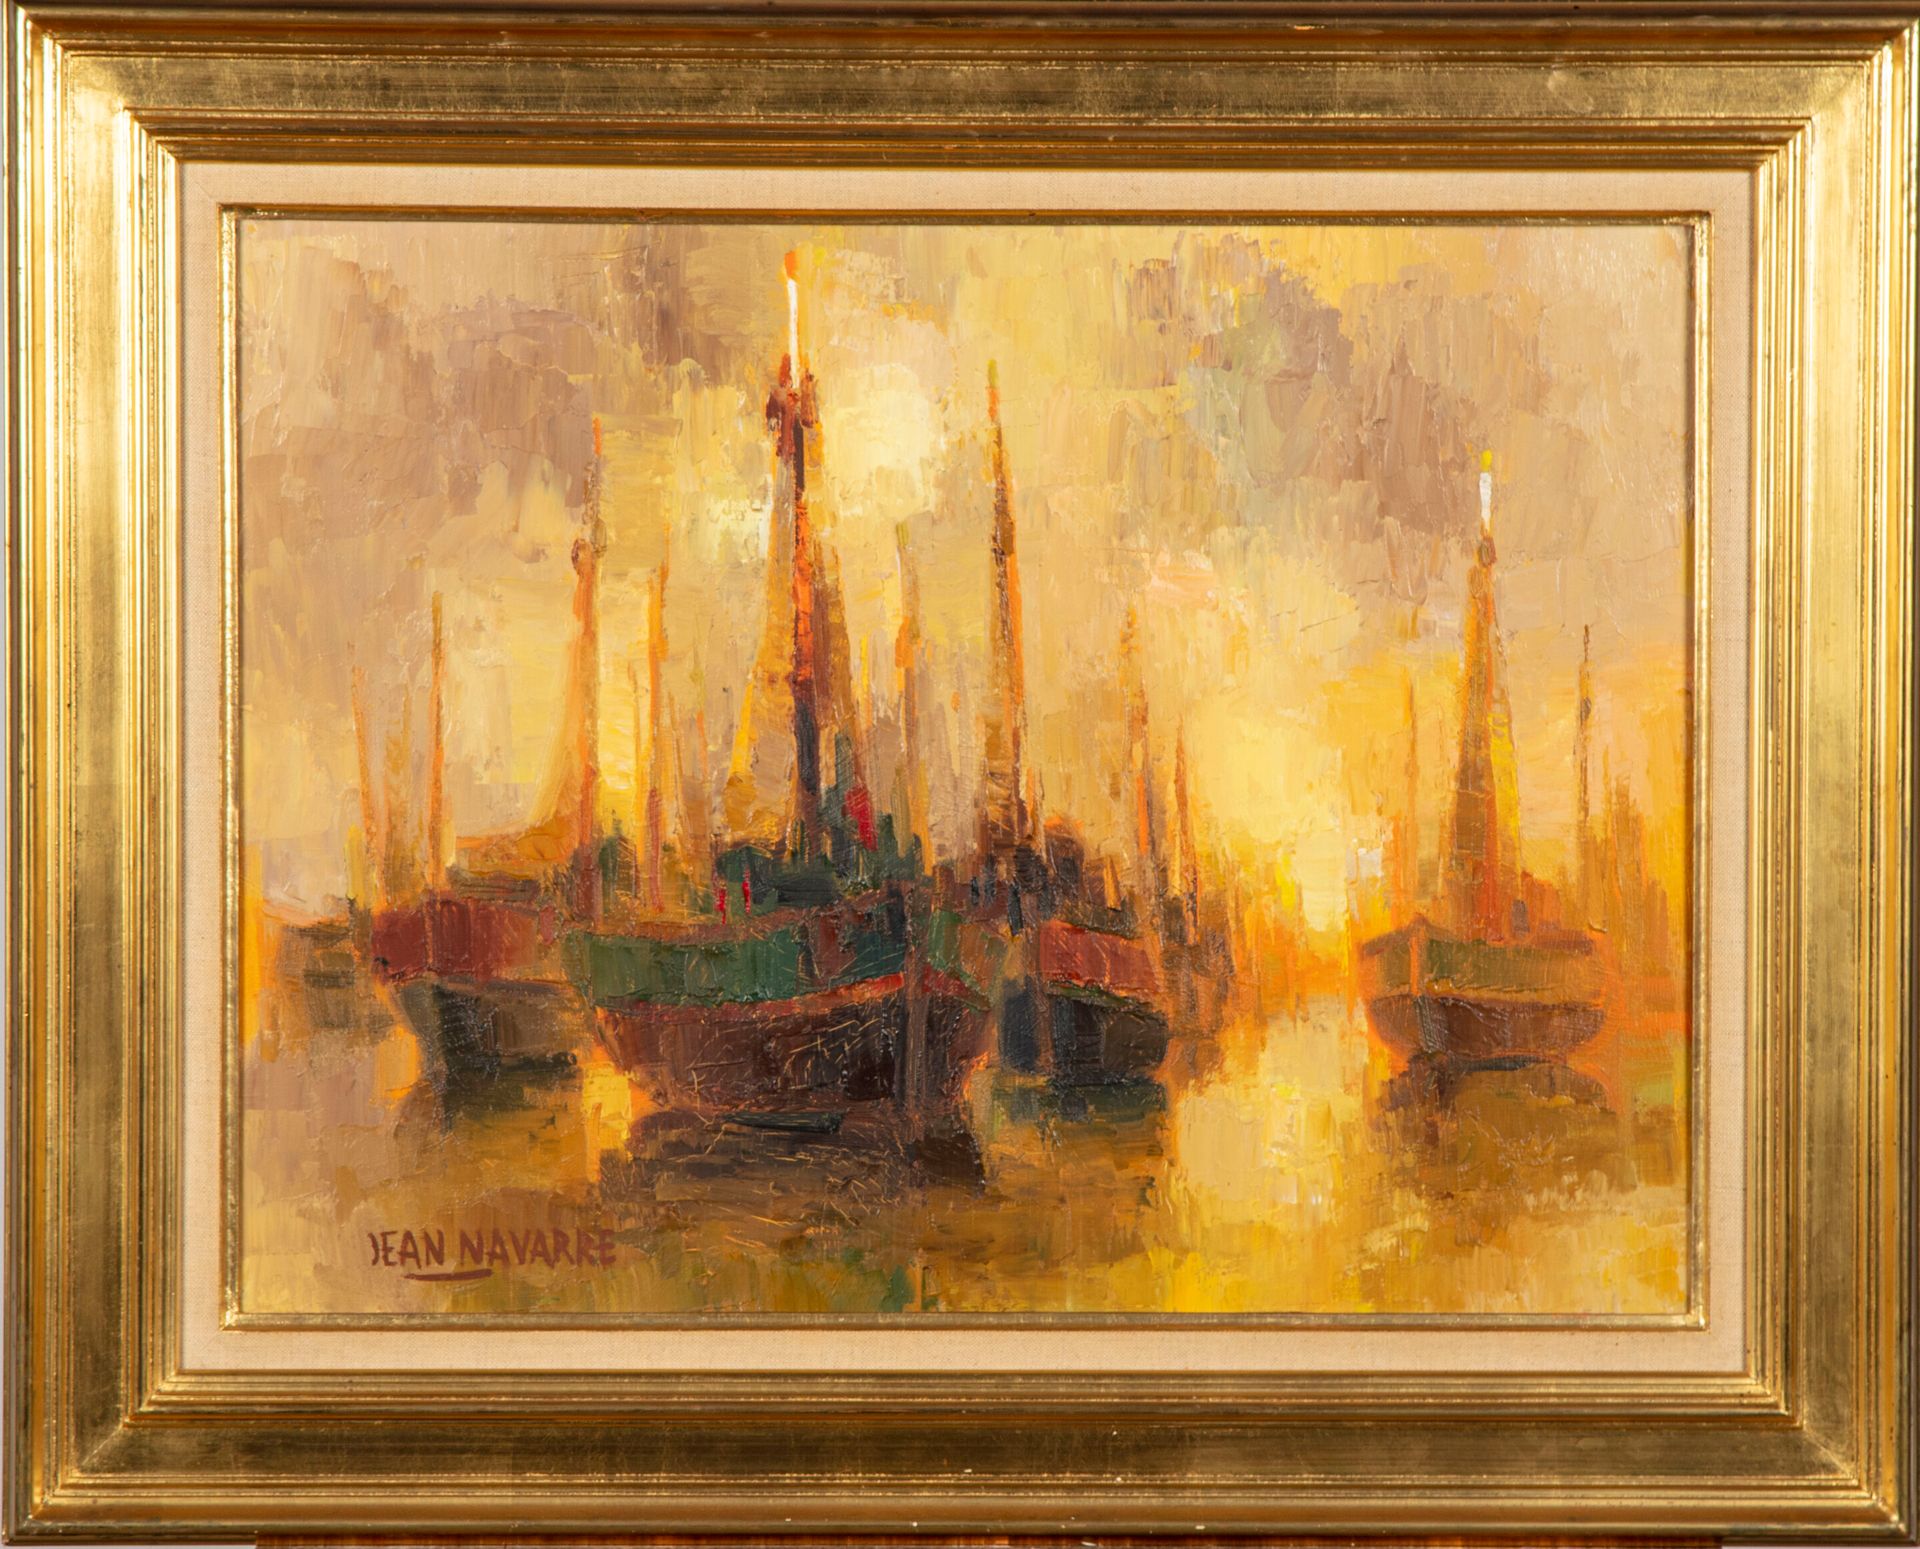 Null Jean NAVARRE (1914-2000)

Boats in the mist

Oil on canvas signed lower lef&hellip;